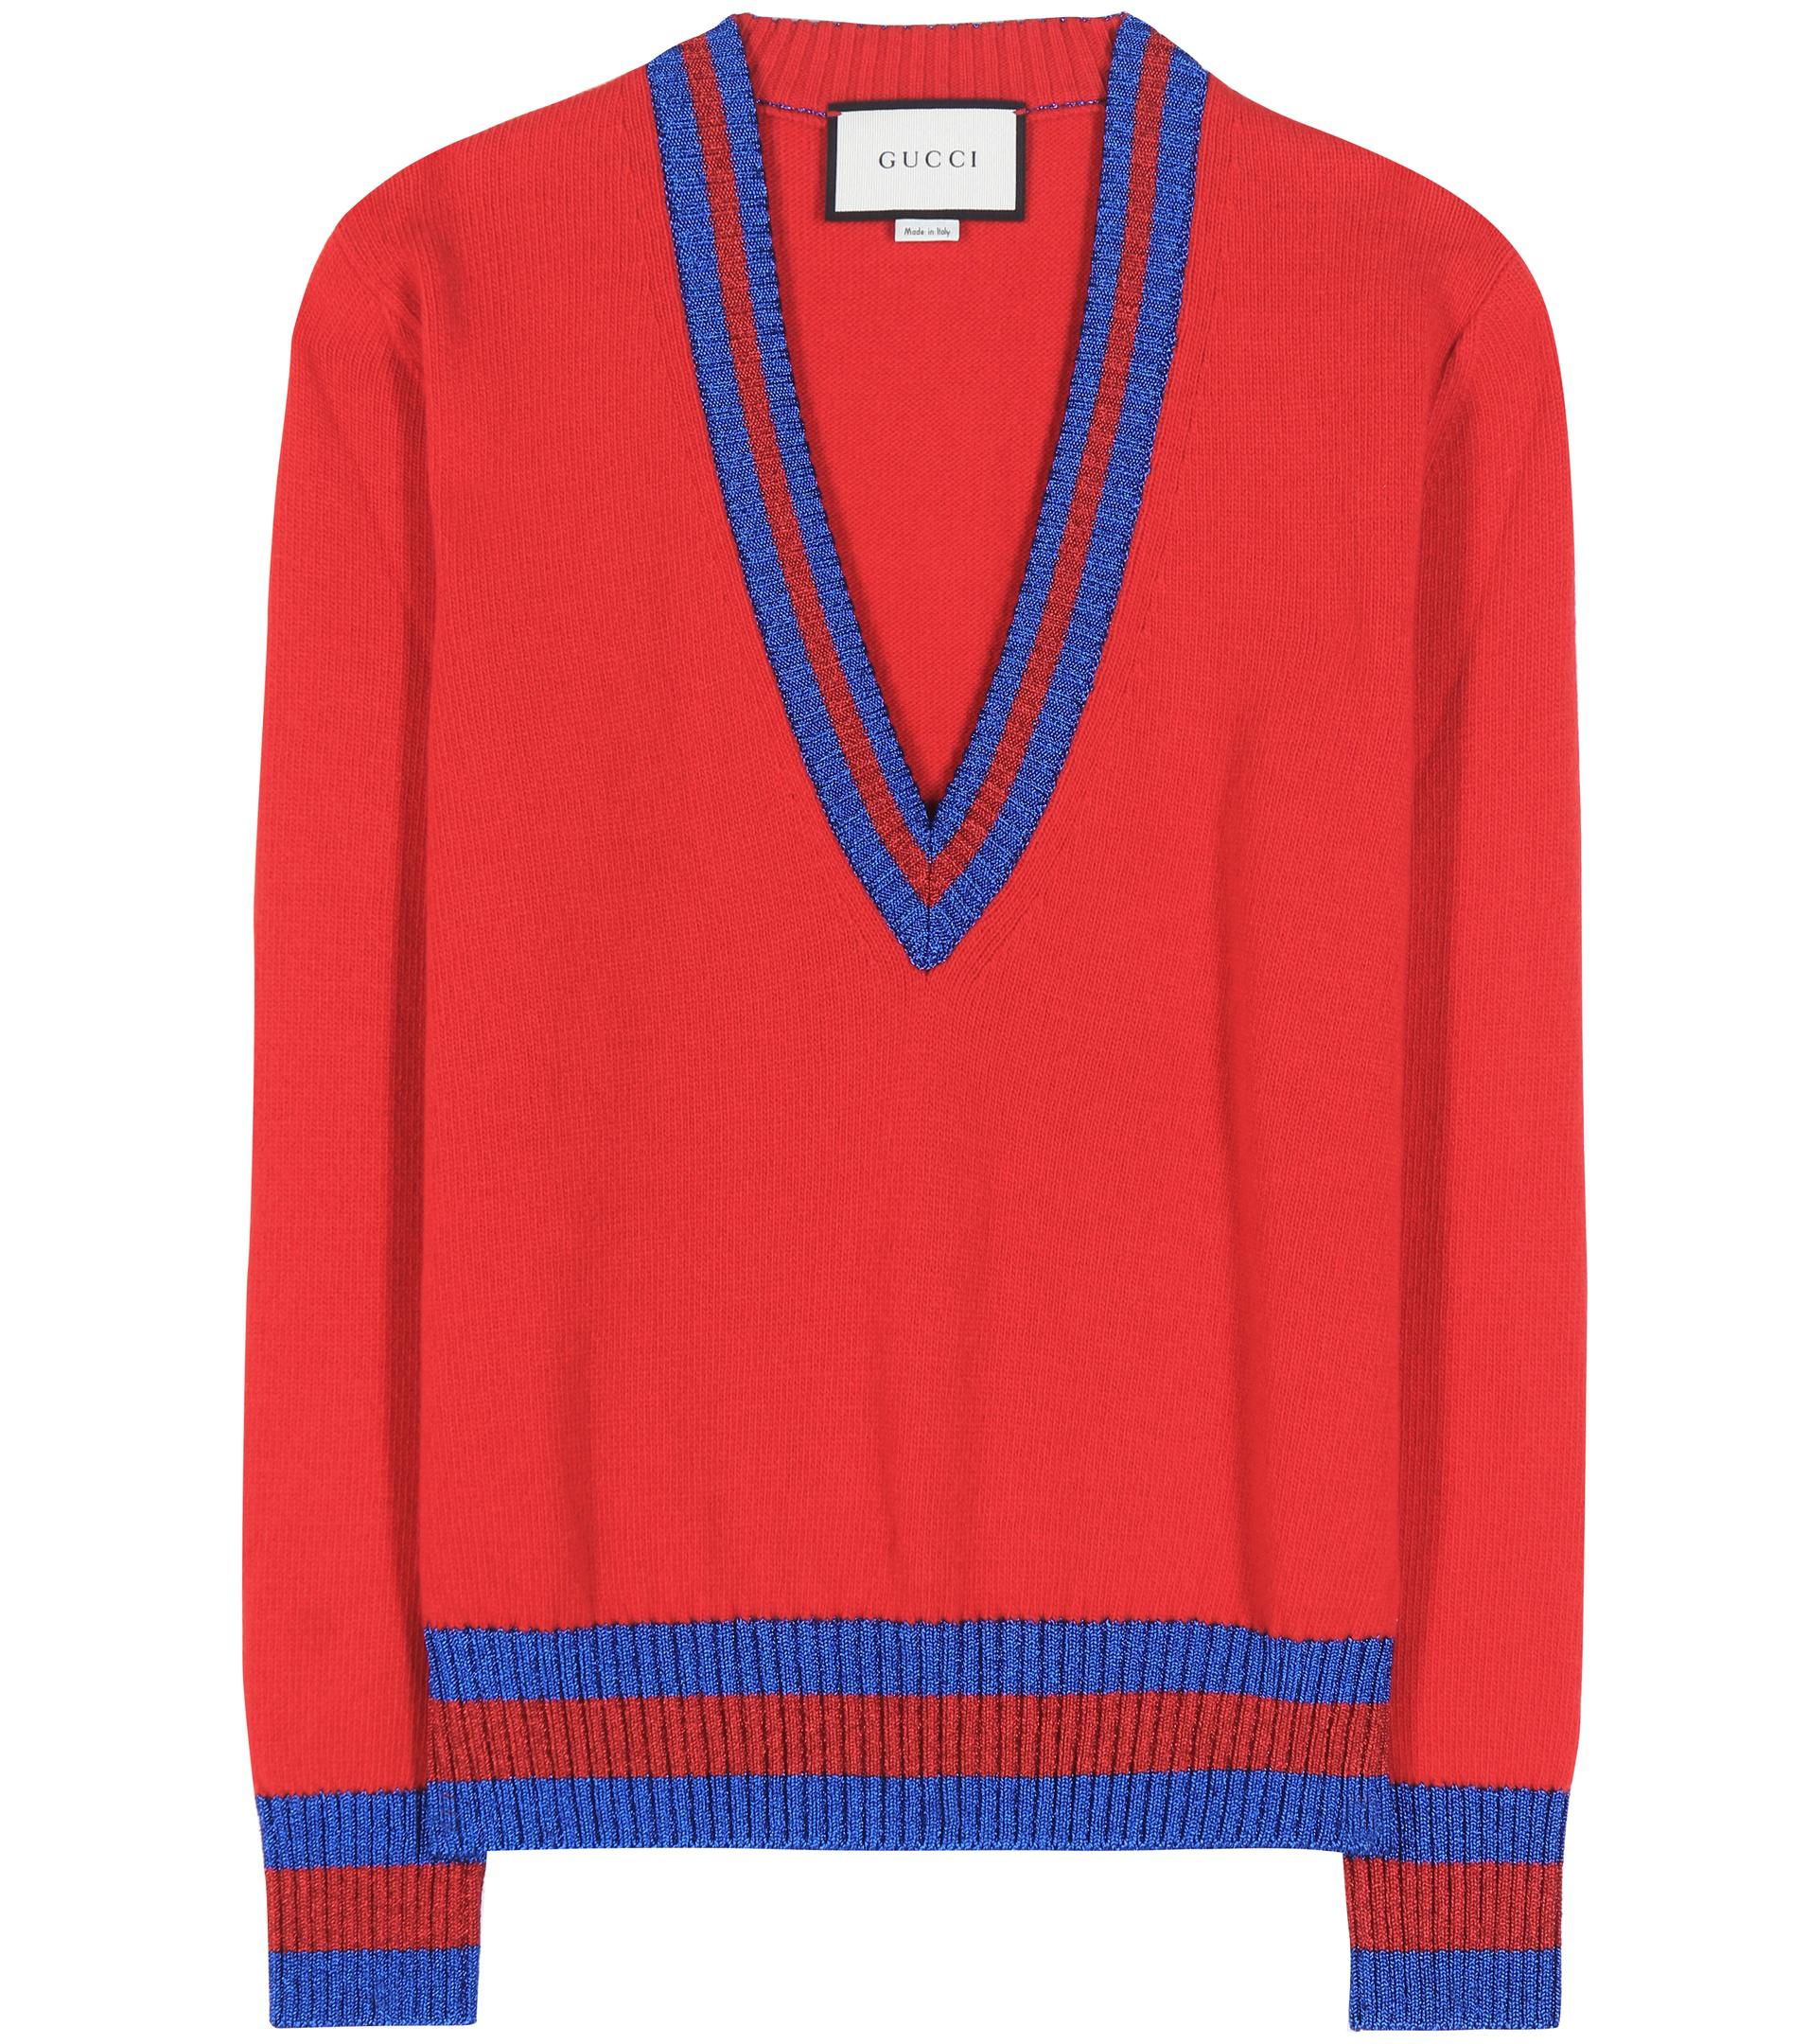 Gucci Knitted Wool Sweater in Red - Lyst